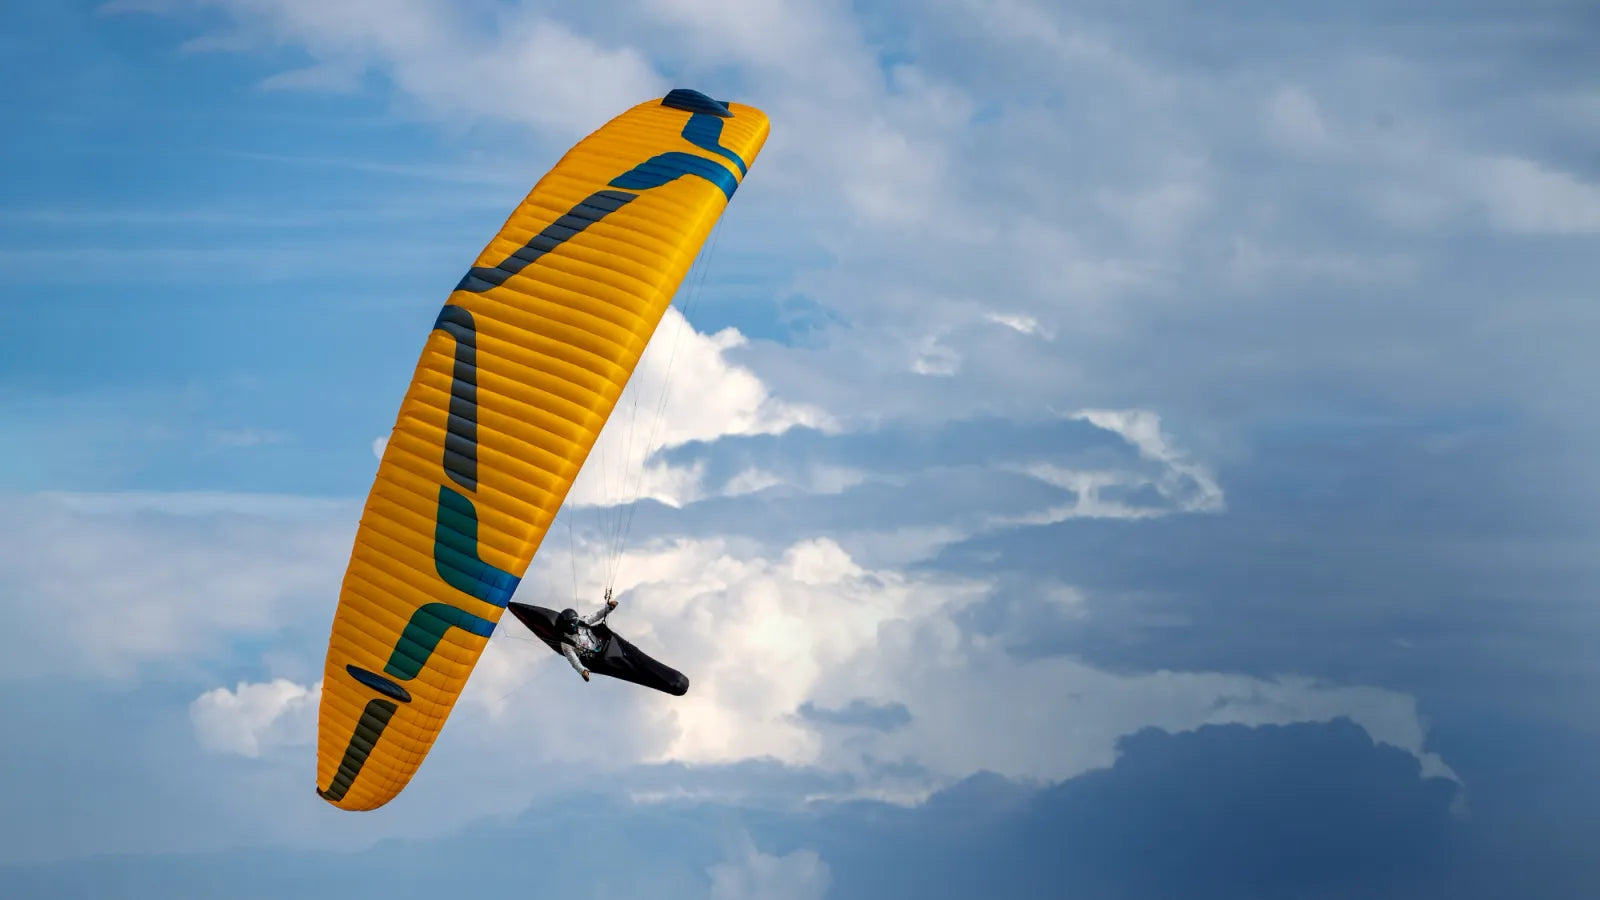 Soaring High with Paragliding Wings: The Importance of Choosing the Right Gear